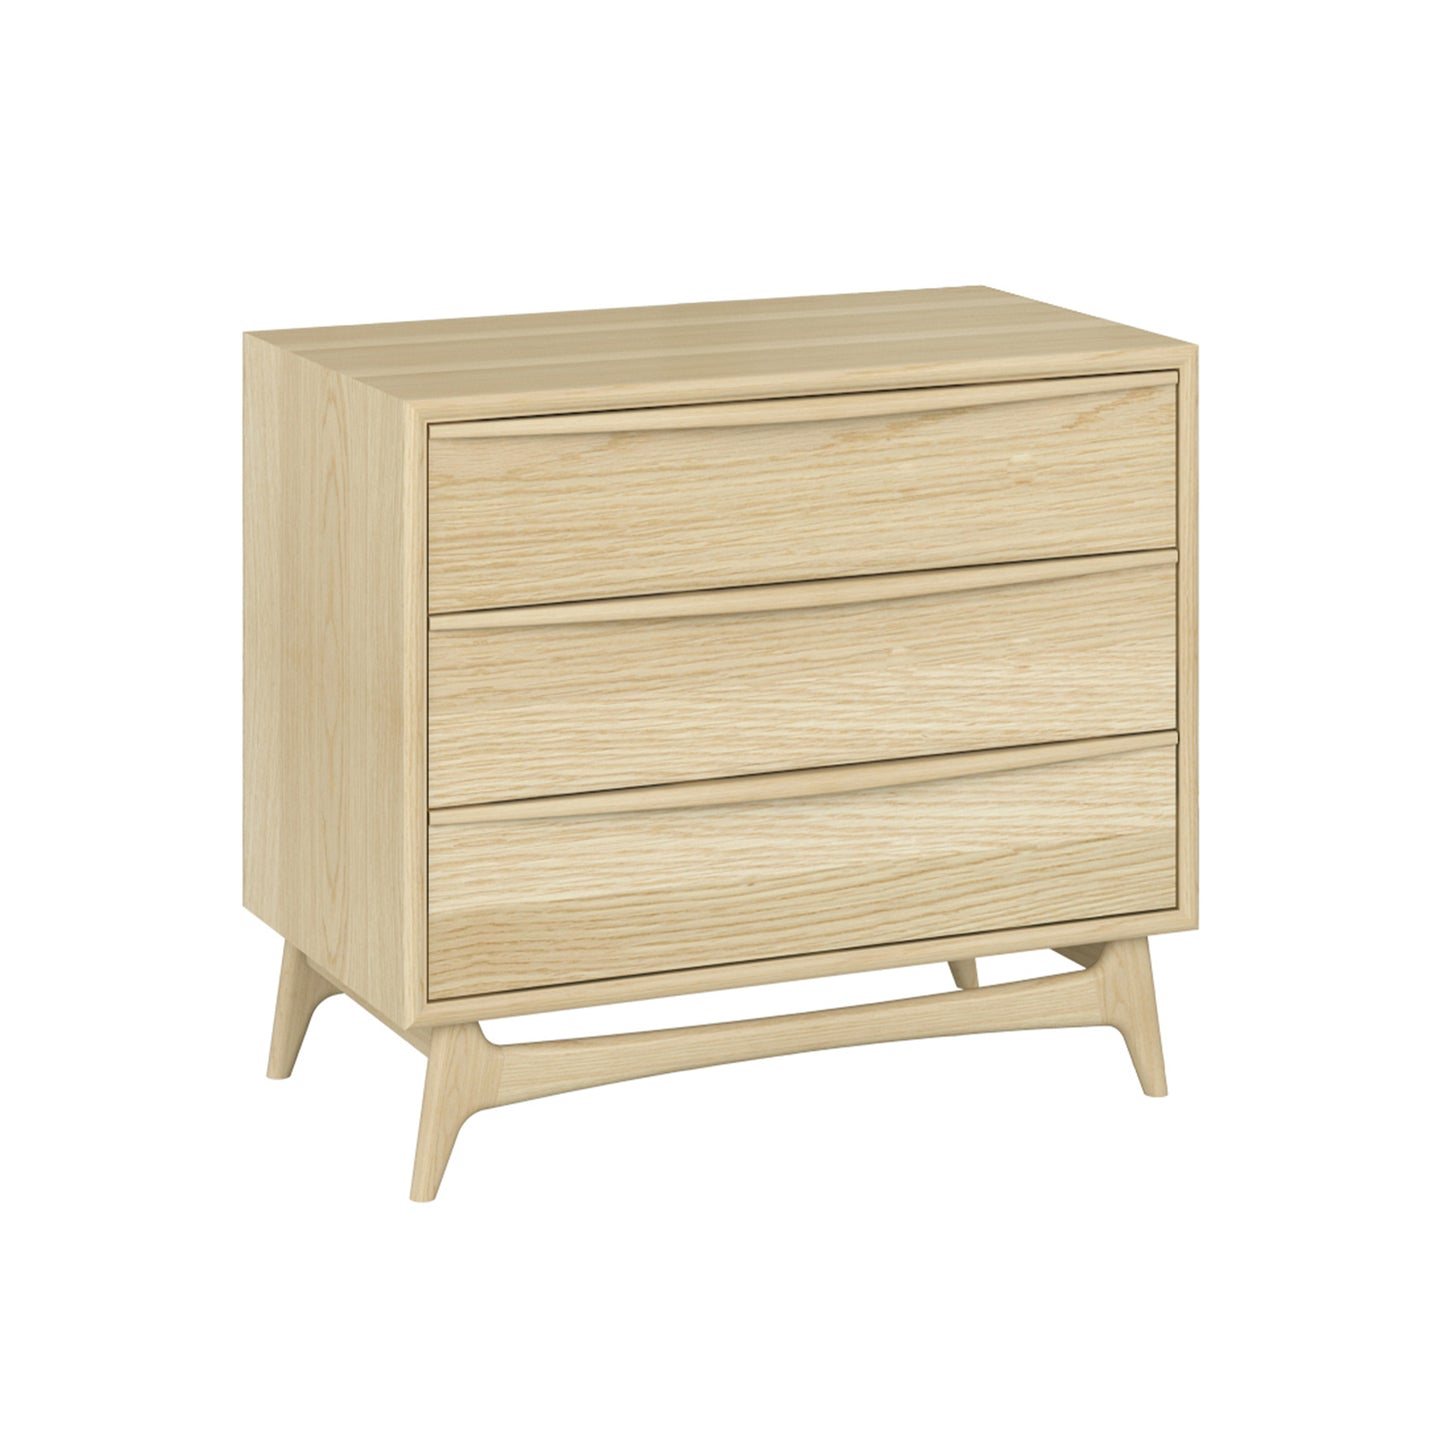 State 3 Drawer Chest - Oak